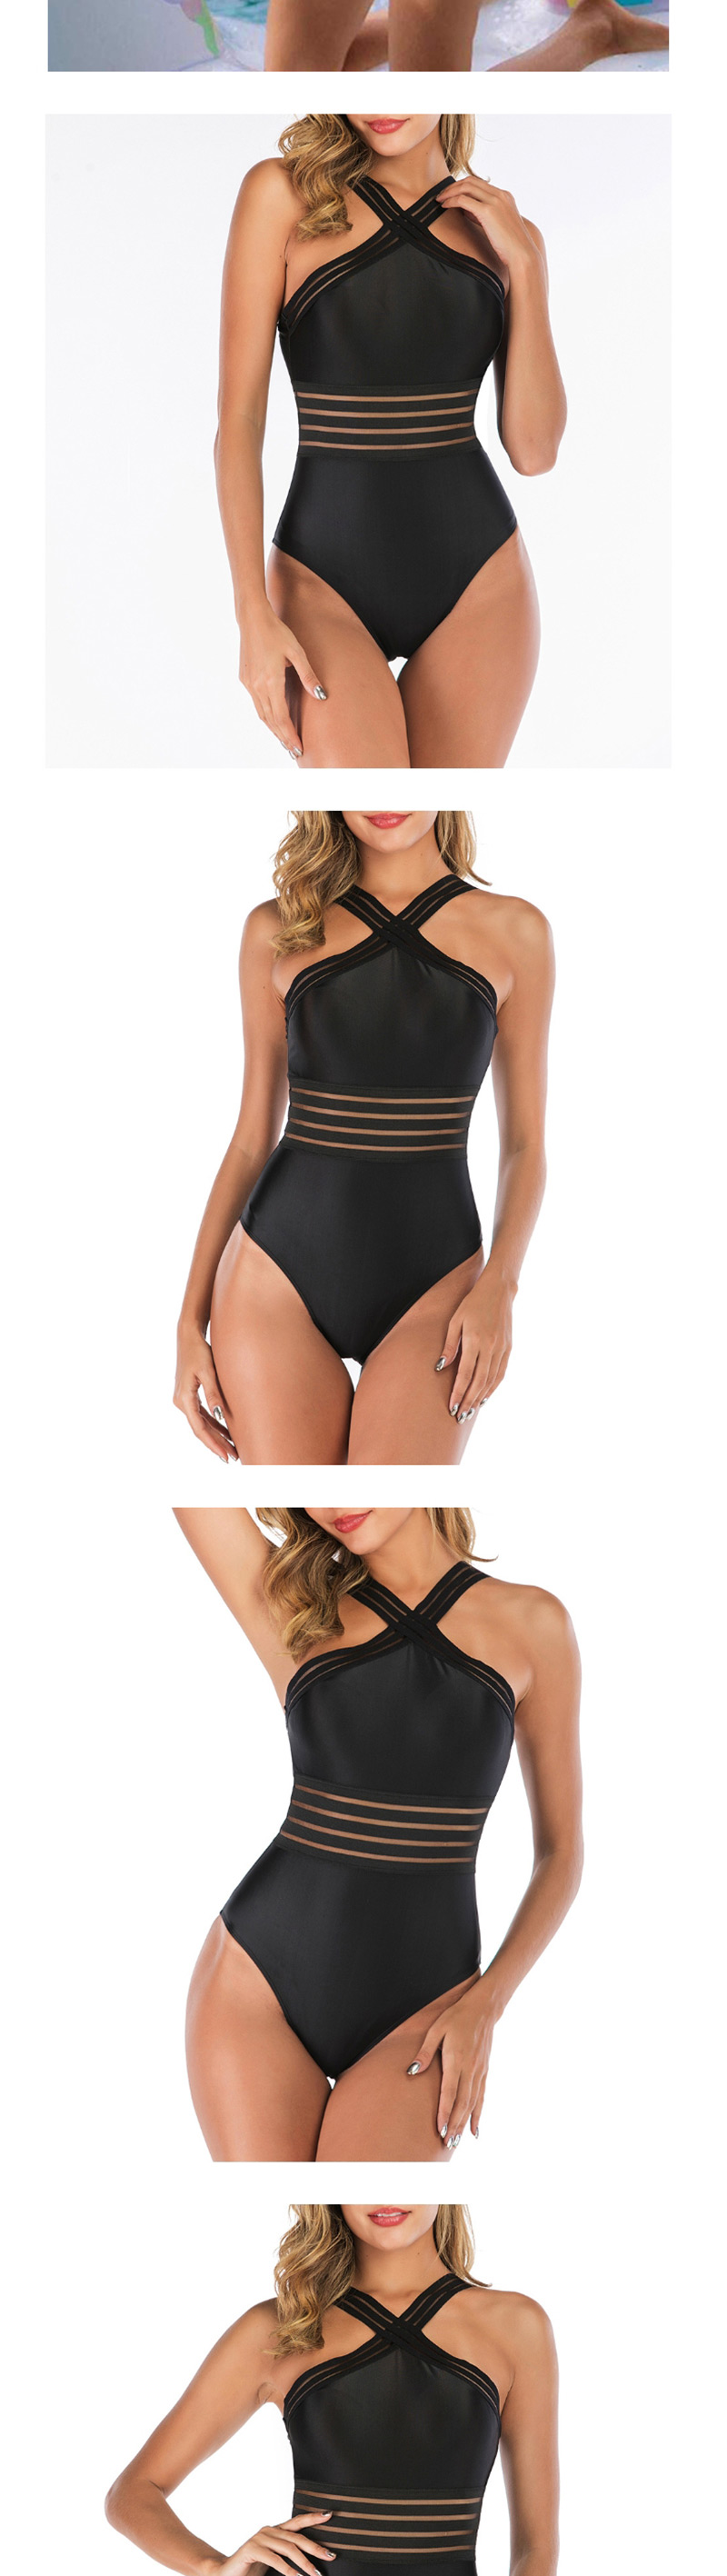 Fashion Red Cross Ribbon Bandage One Piece Swimsuit,One Pieces